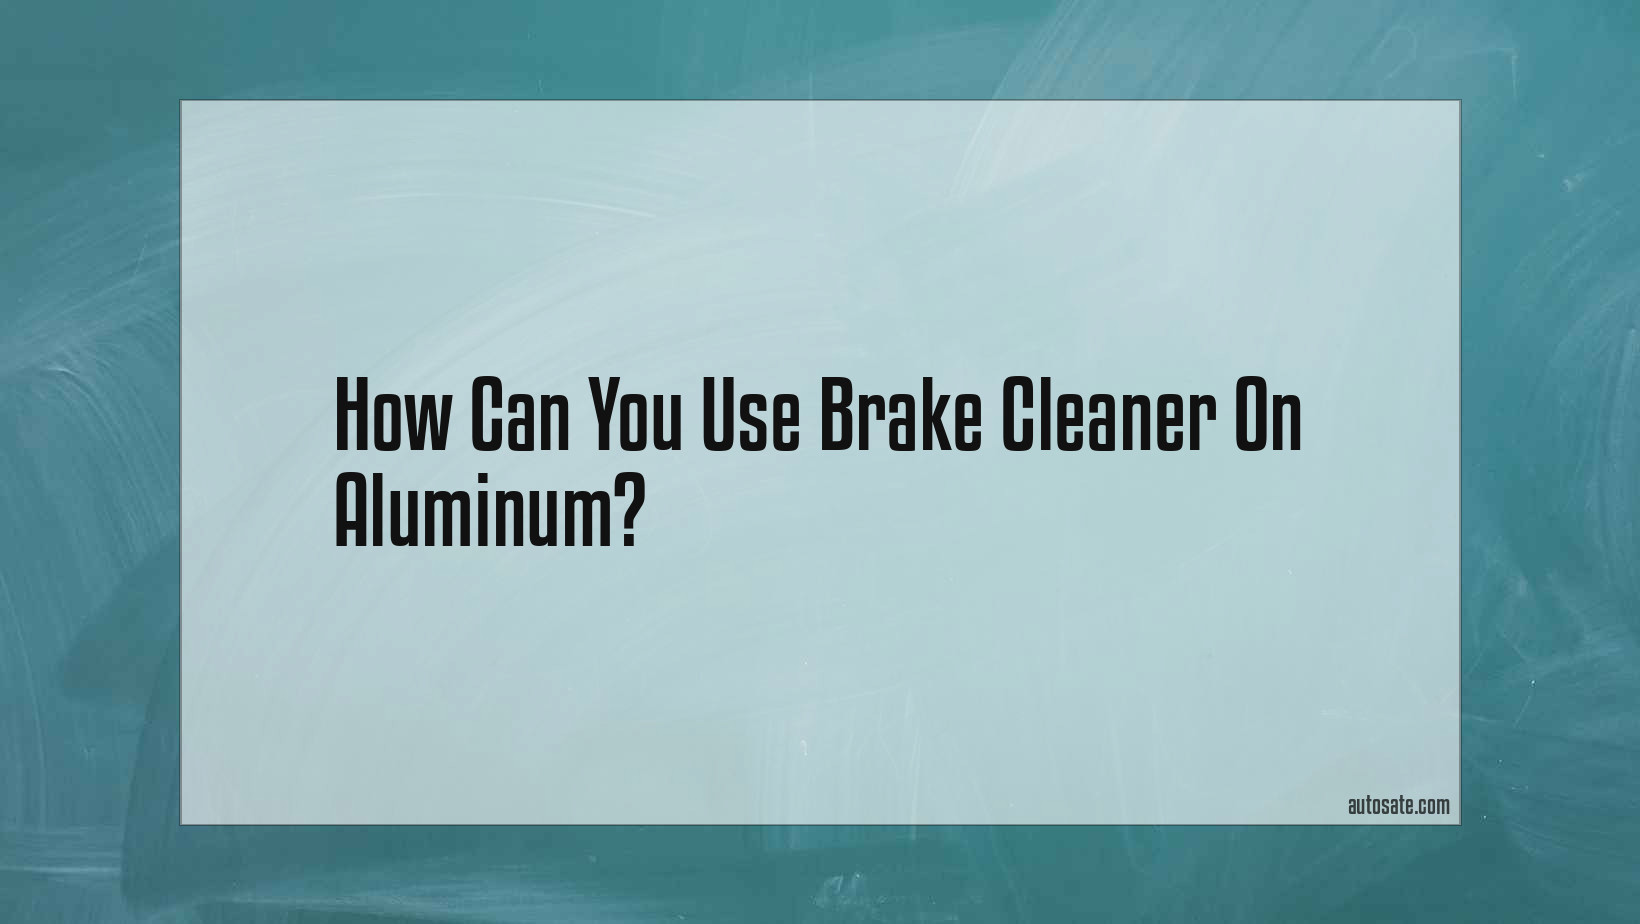 Can You Use Brake Cleaner On Aluminum